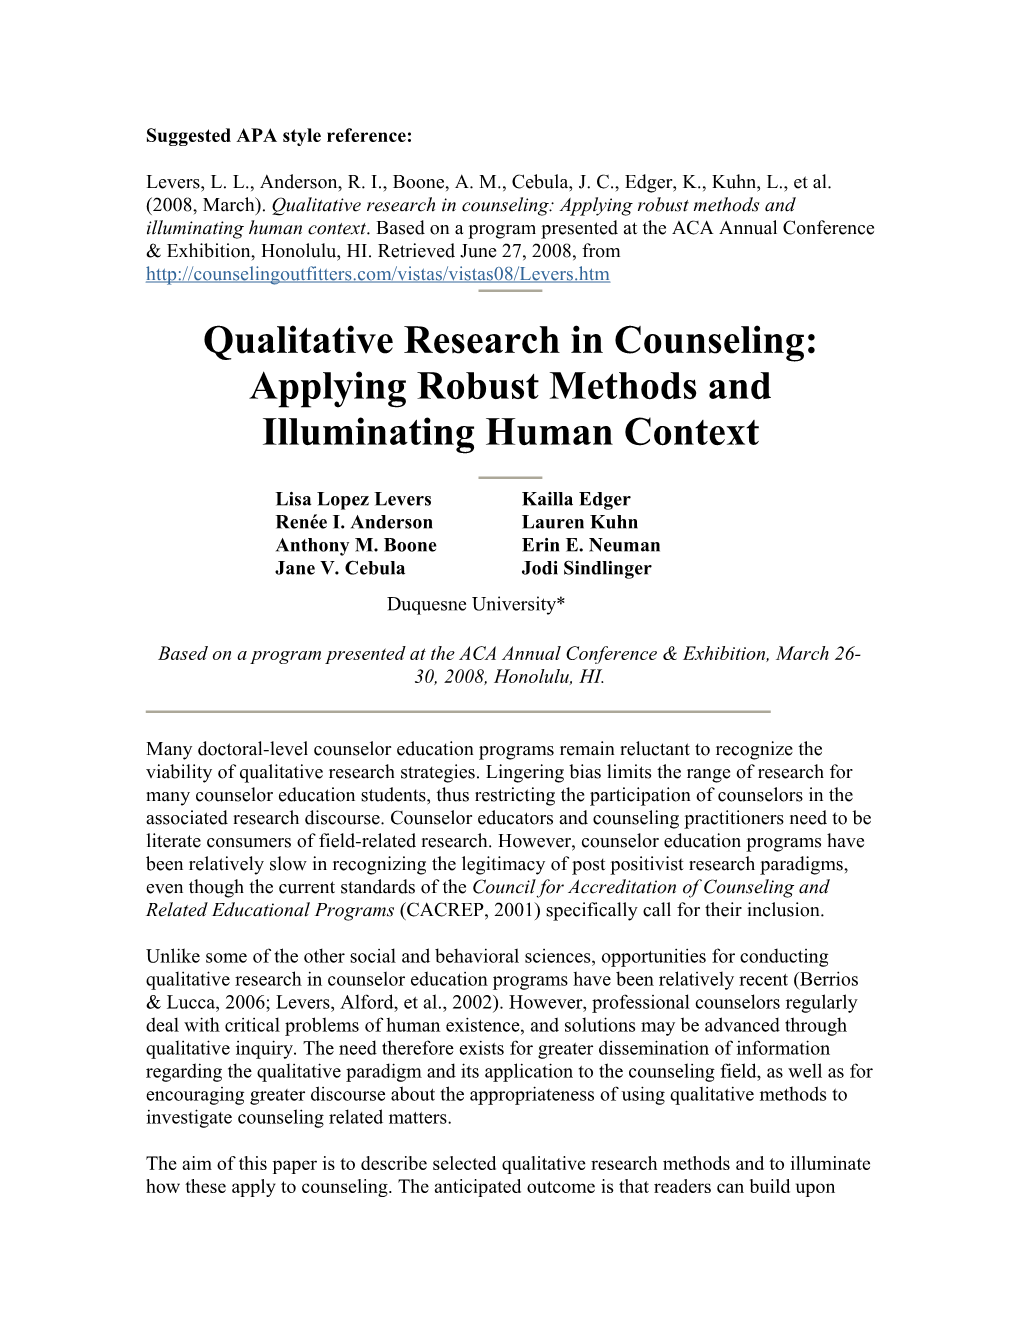 Qualitative Research in Counseling: Applying Robust Methods and Illuminating Human Context